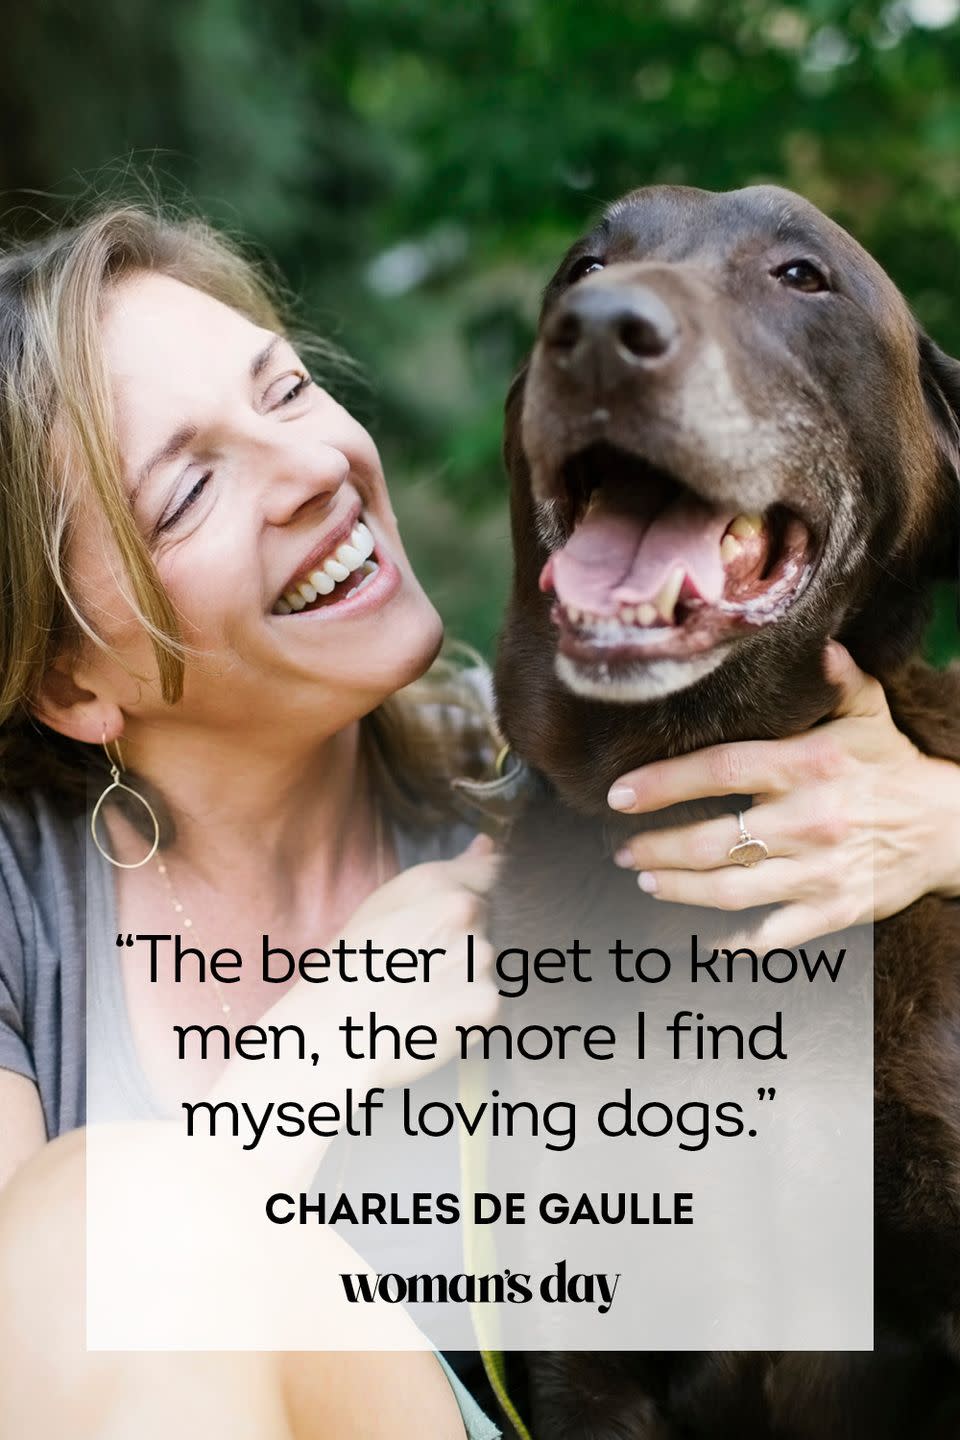 <p>“The better I get to know men, the more I find myself loving dogs.”</p>